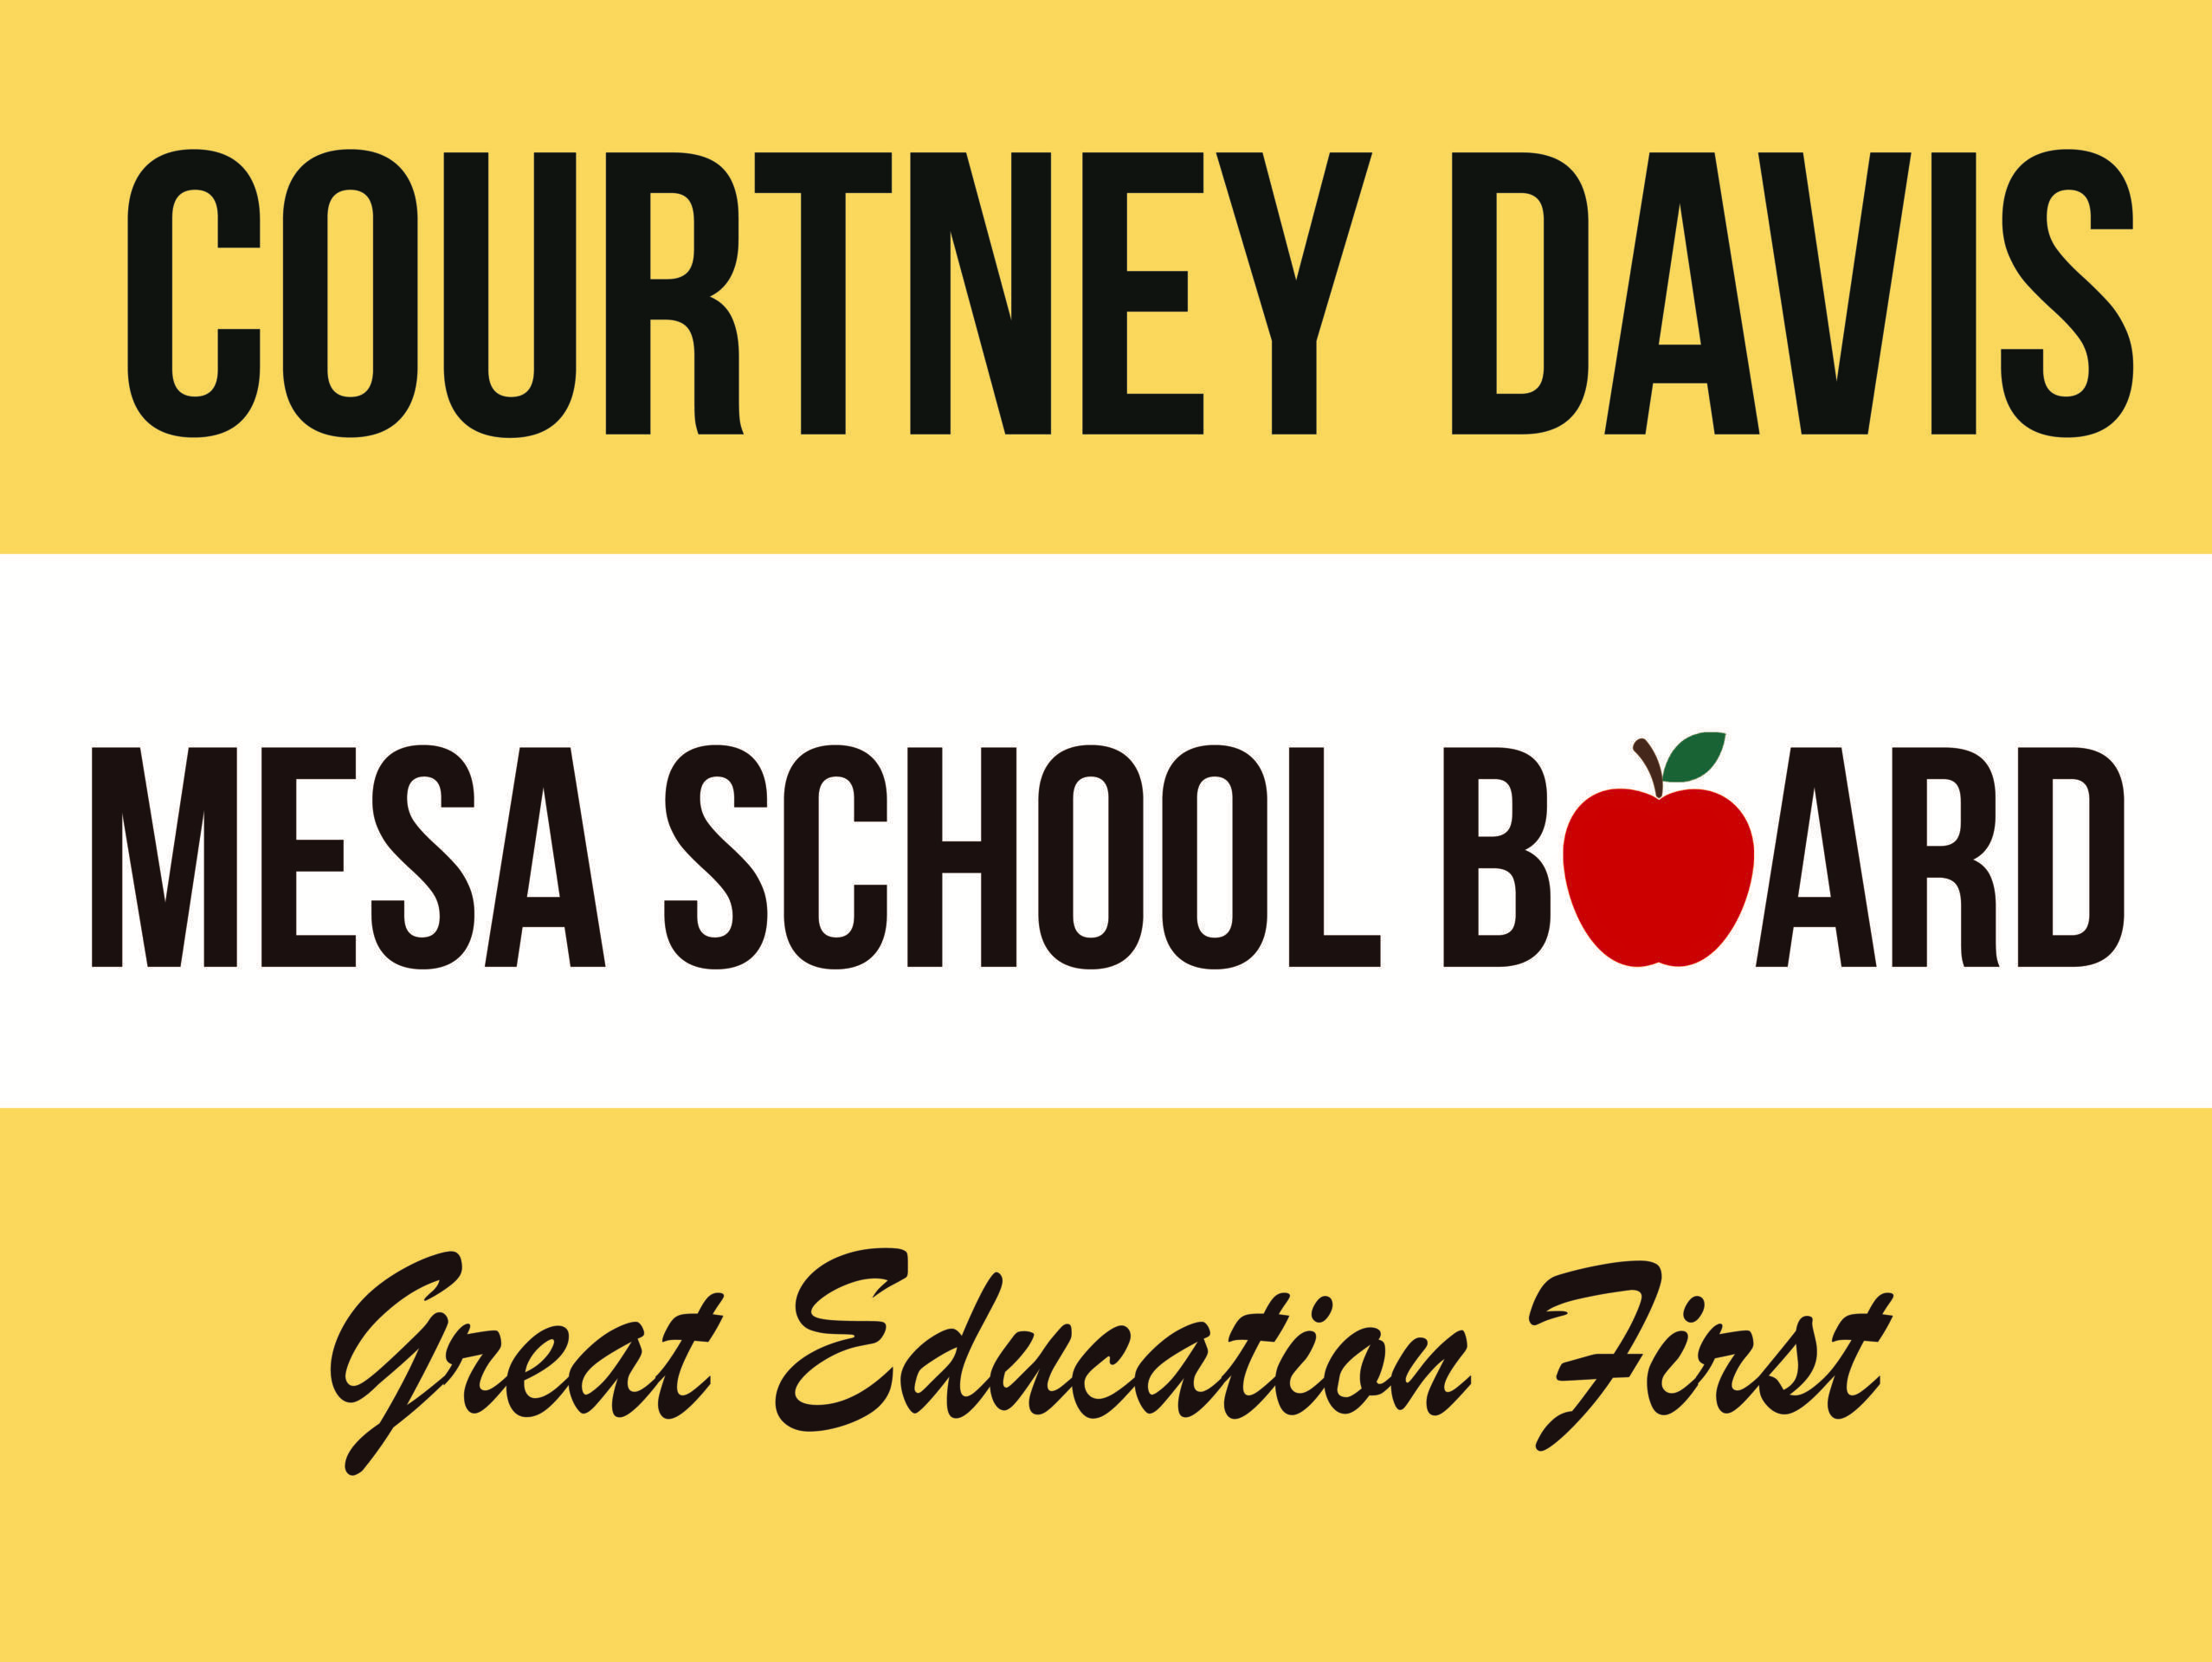 Logo - yellow and white striped design that says Courtney Davis, Mesa School Board, Great Education First.